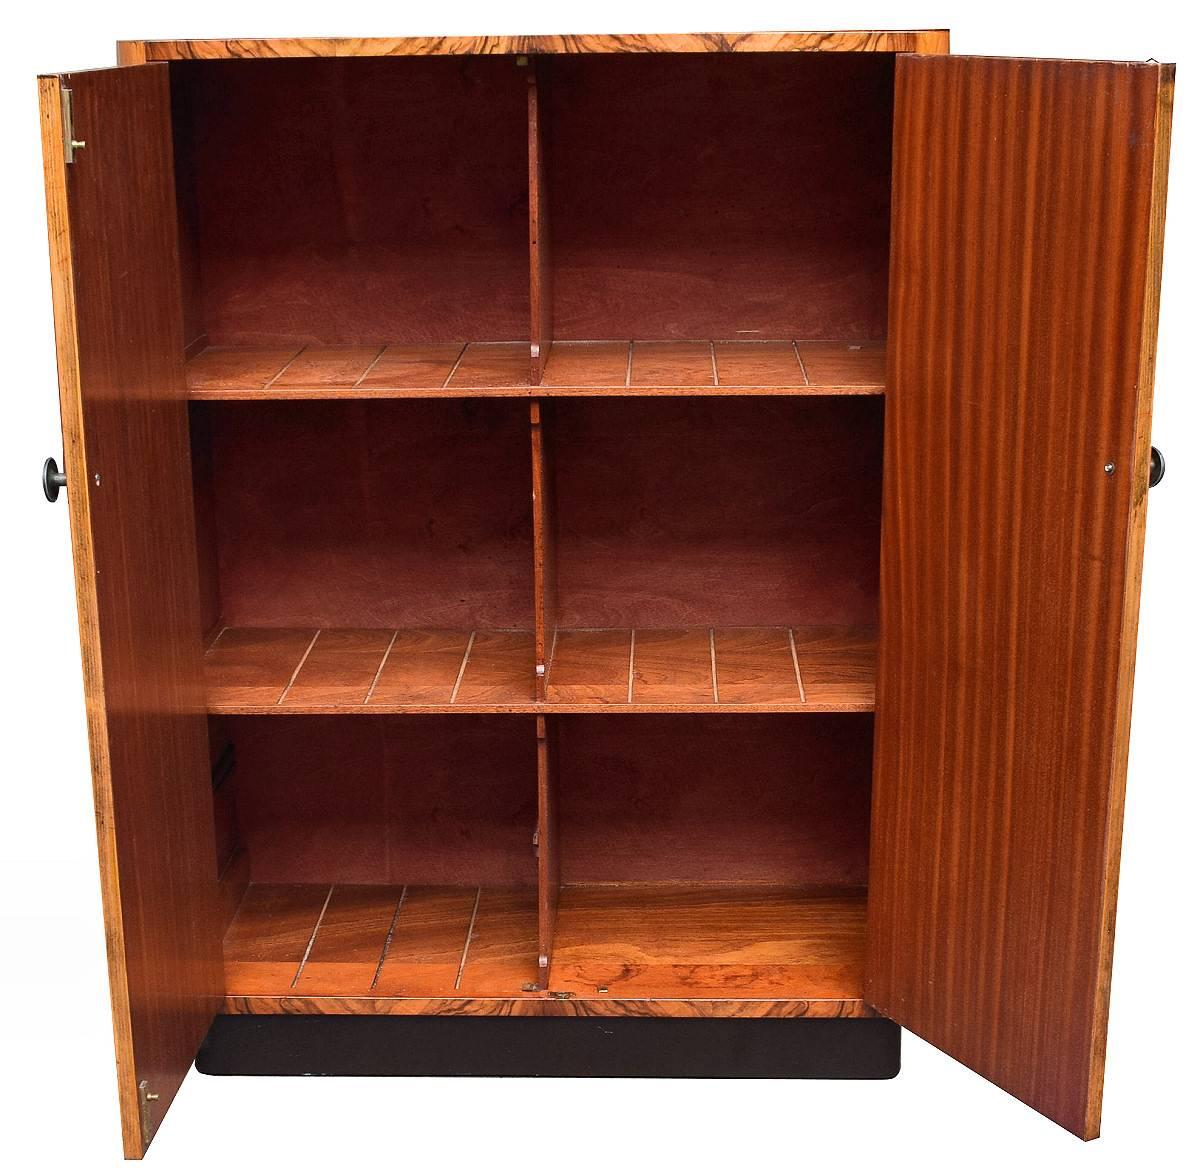 Very attractive and functional piece of furniture that oozes quality. This is an Art Deco cupboard, very generously sized interior for all your needs. Sectioned into six spaces but could be adapted to add further sections perhaps for filing.